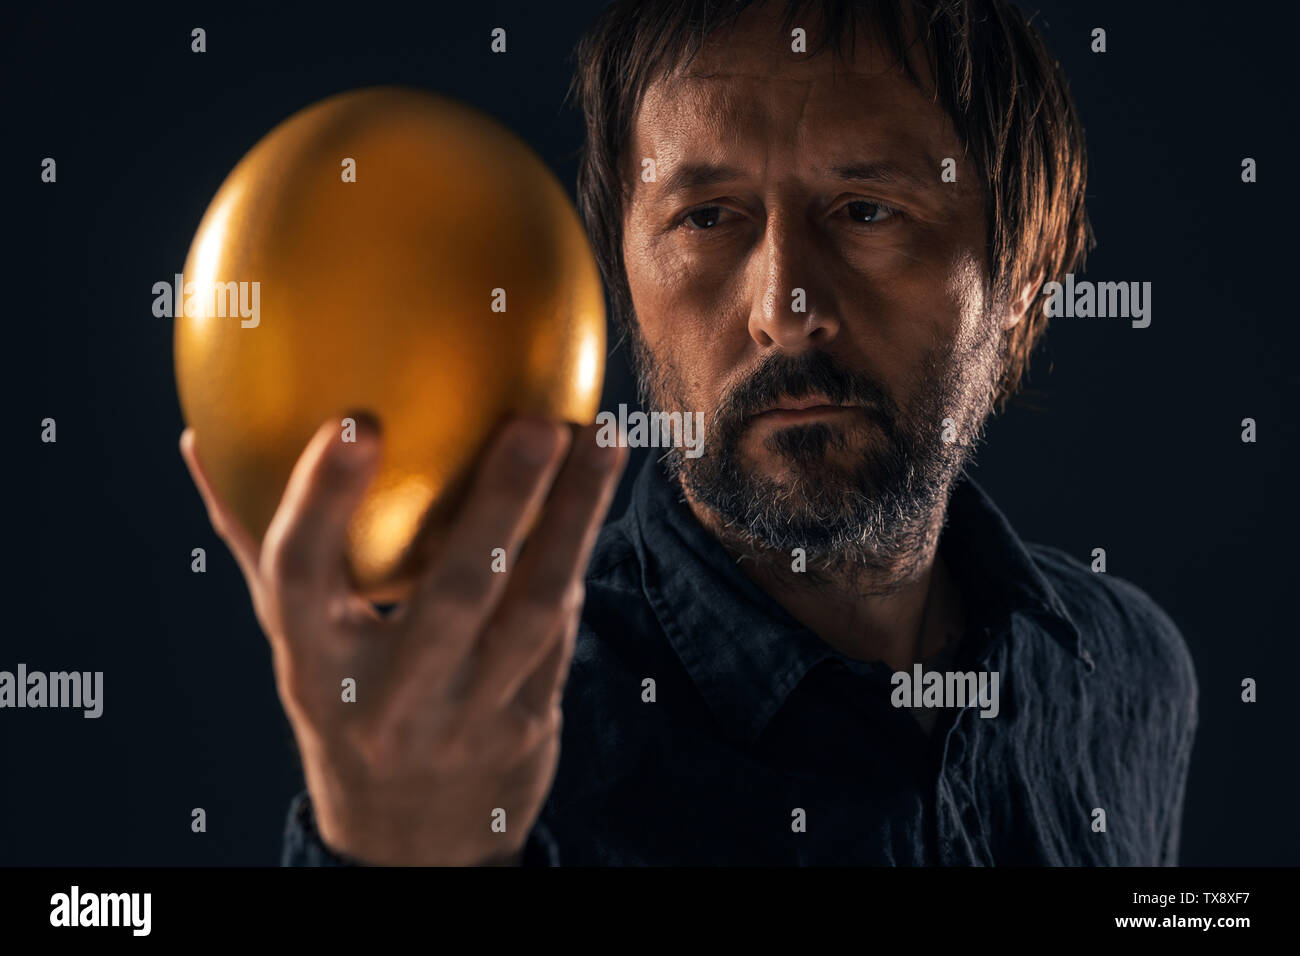 Man and golden egg. Valuable business resources and investment opportunity concept. Stock Photo